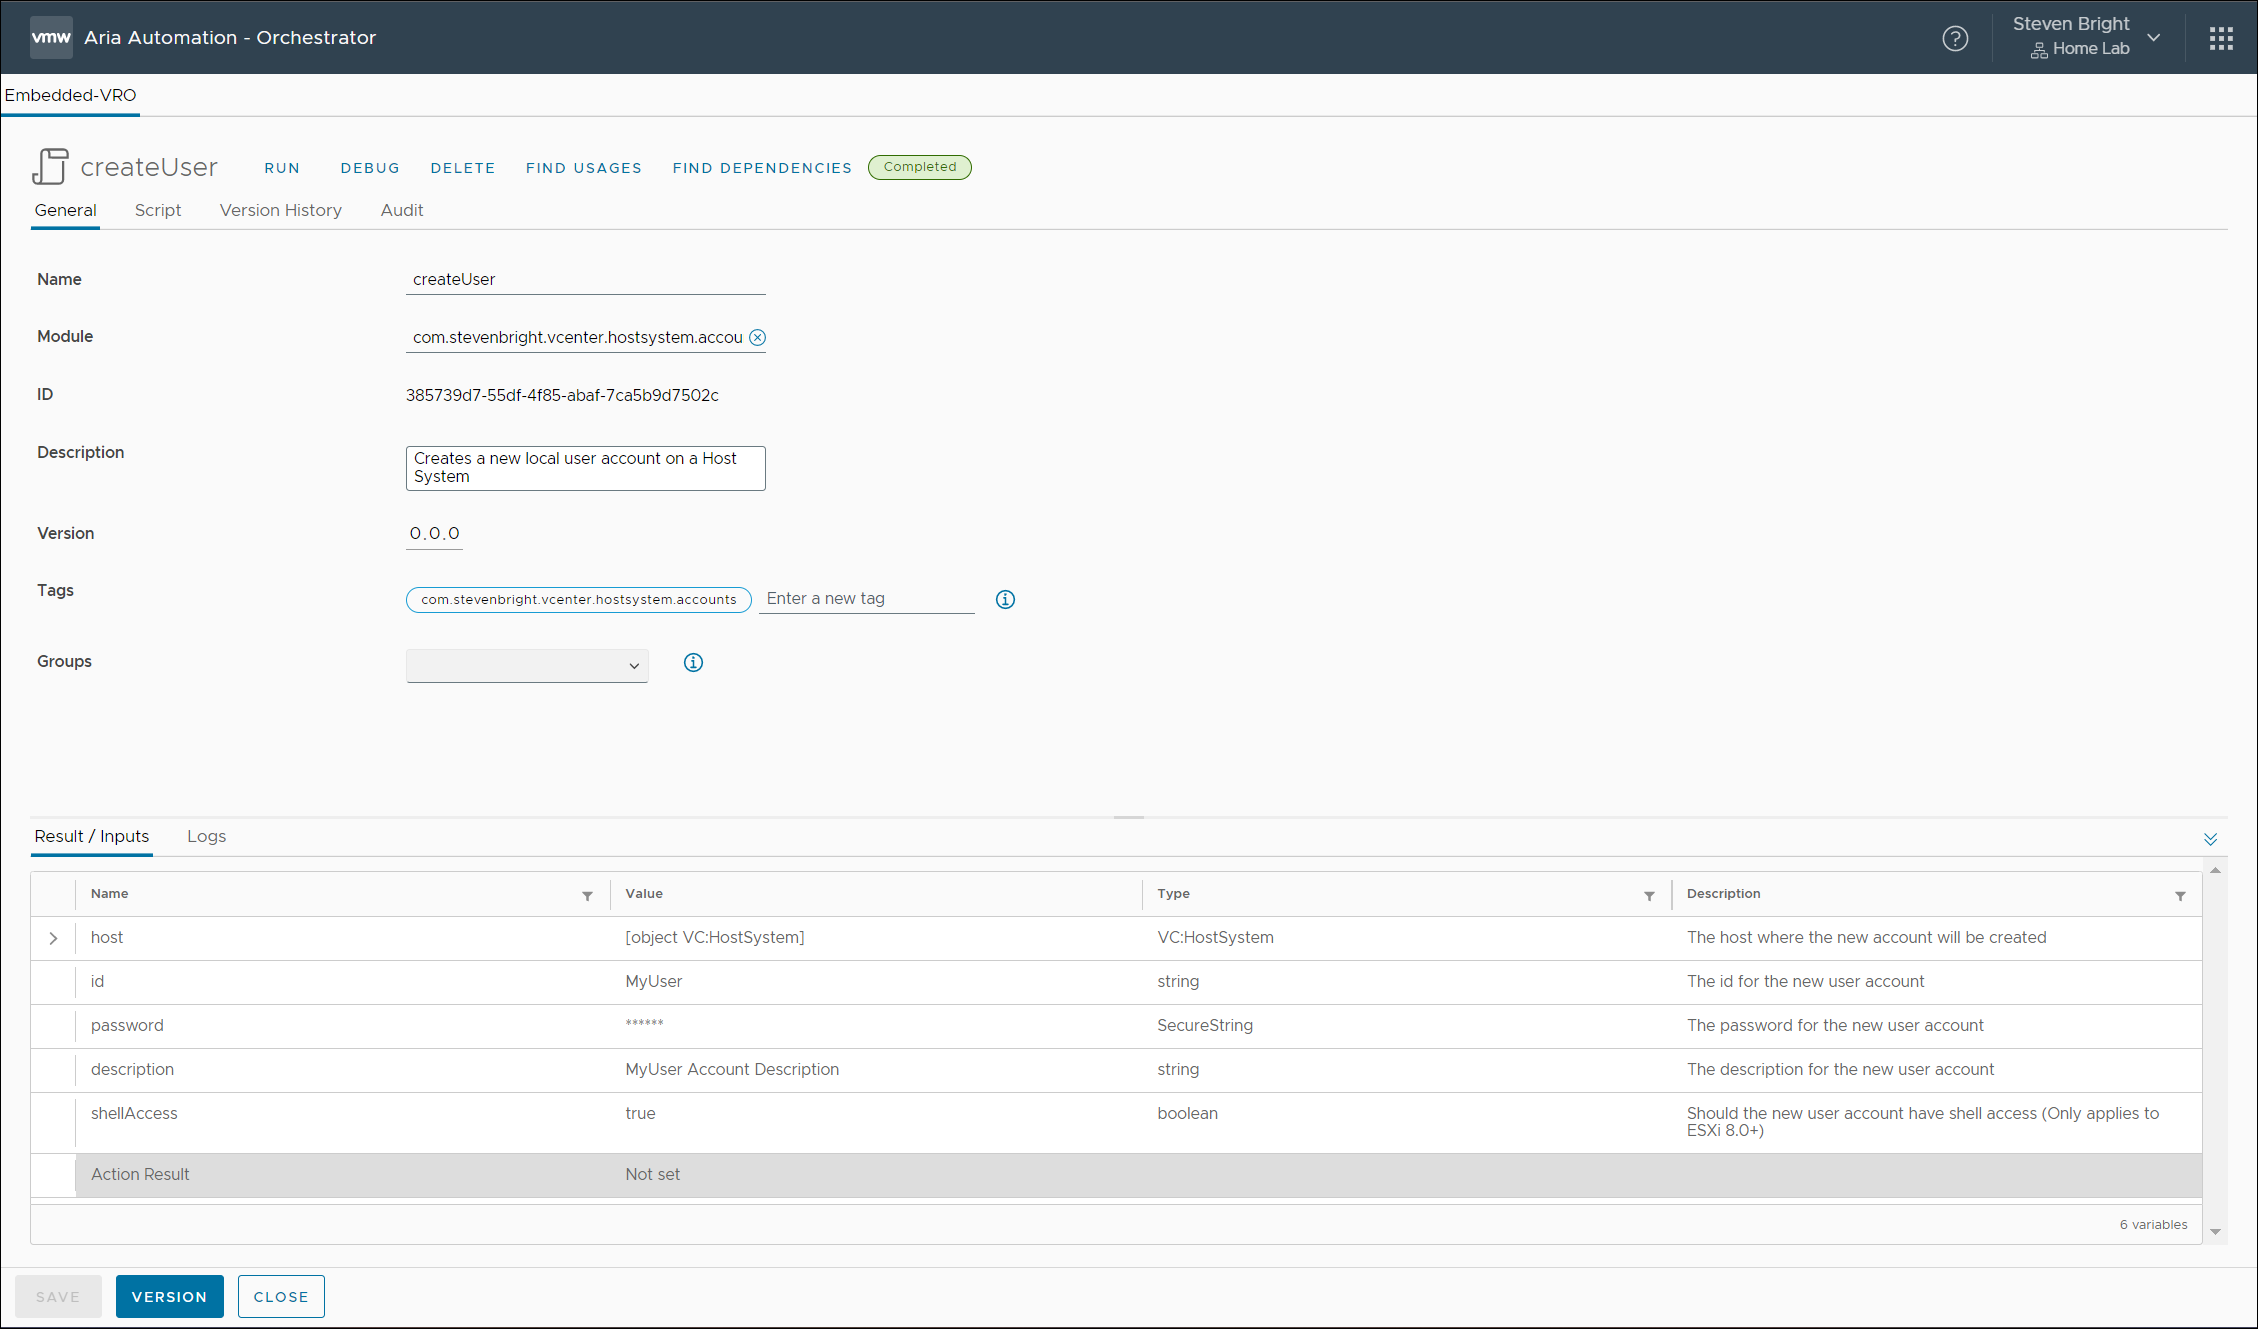 Screenshot of the VMware Aria Automation Orchestrator Action Results showing the creation of a new user account